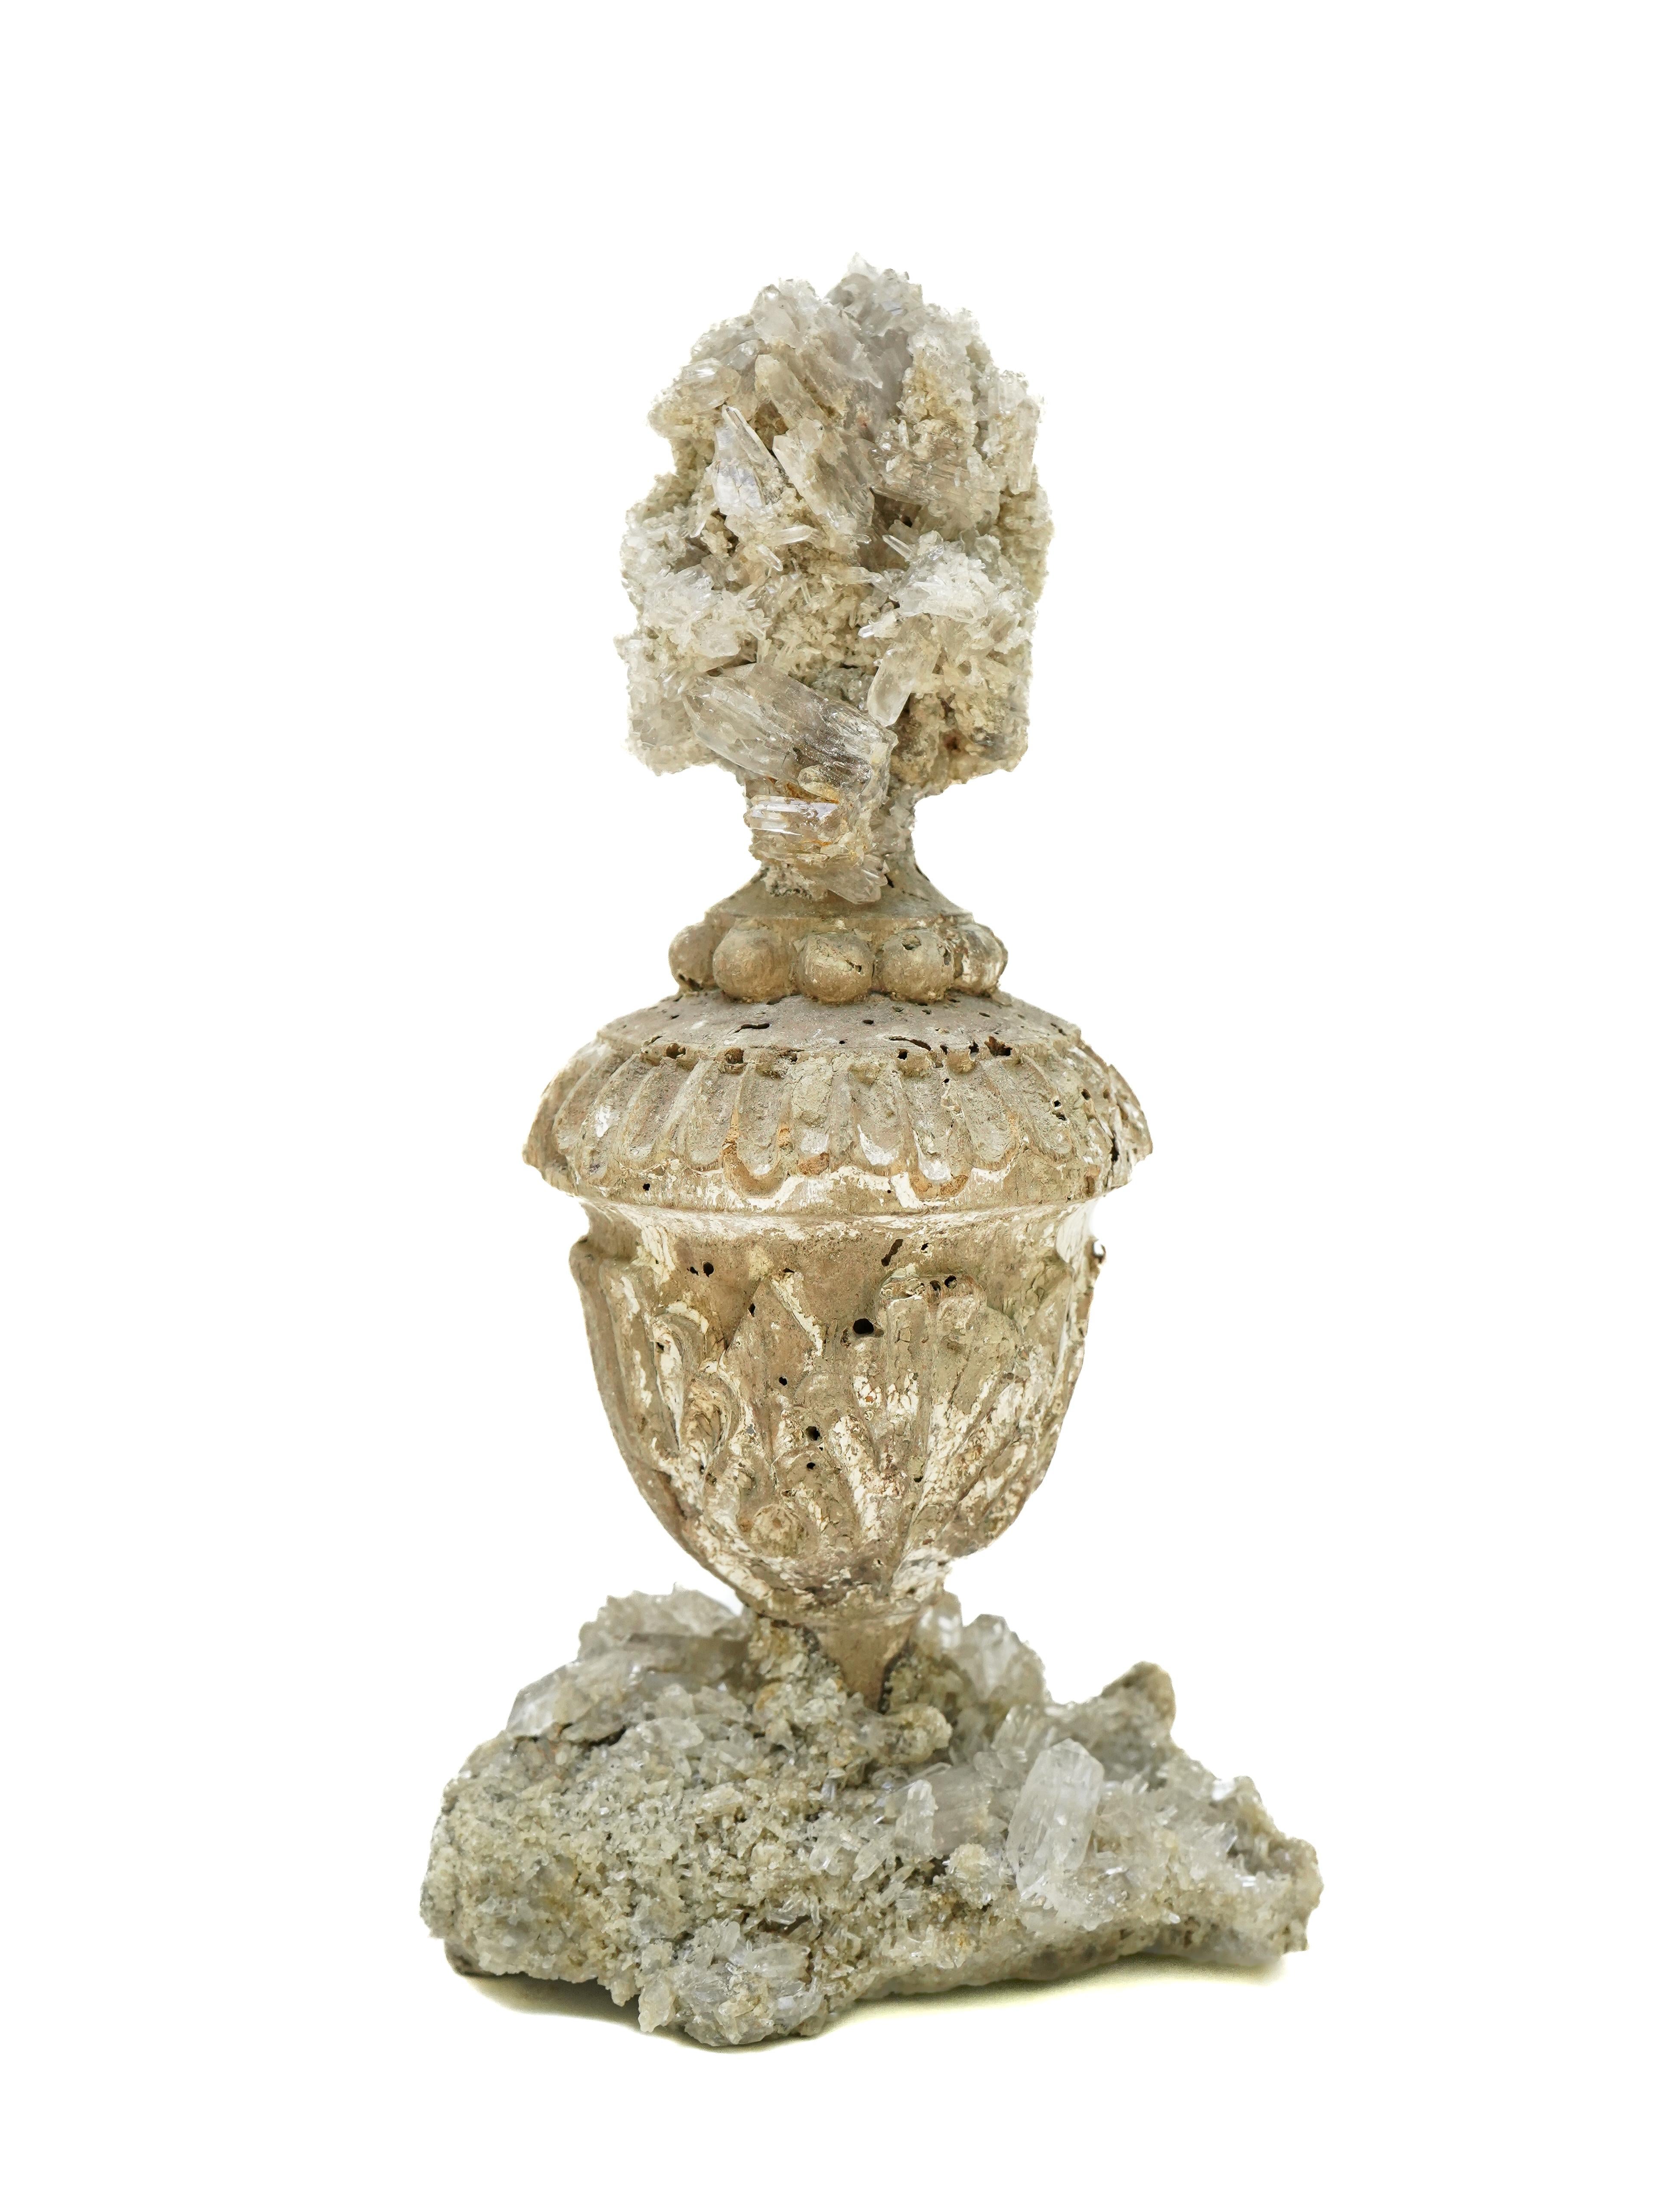 17th century Italian vase with a crystal quartz cluster on a crystal quartz cluster base.

This fragment is from a church in Florence. It was found and saved from the historic Florence Flood of 1966. This was one of the worst floods recorded since